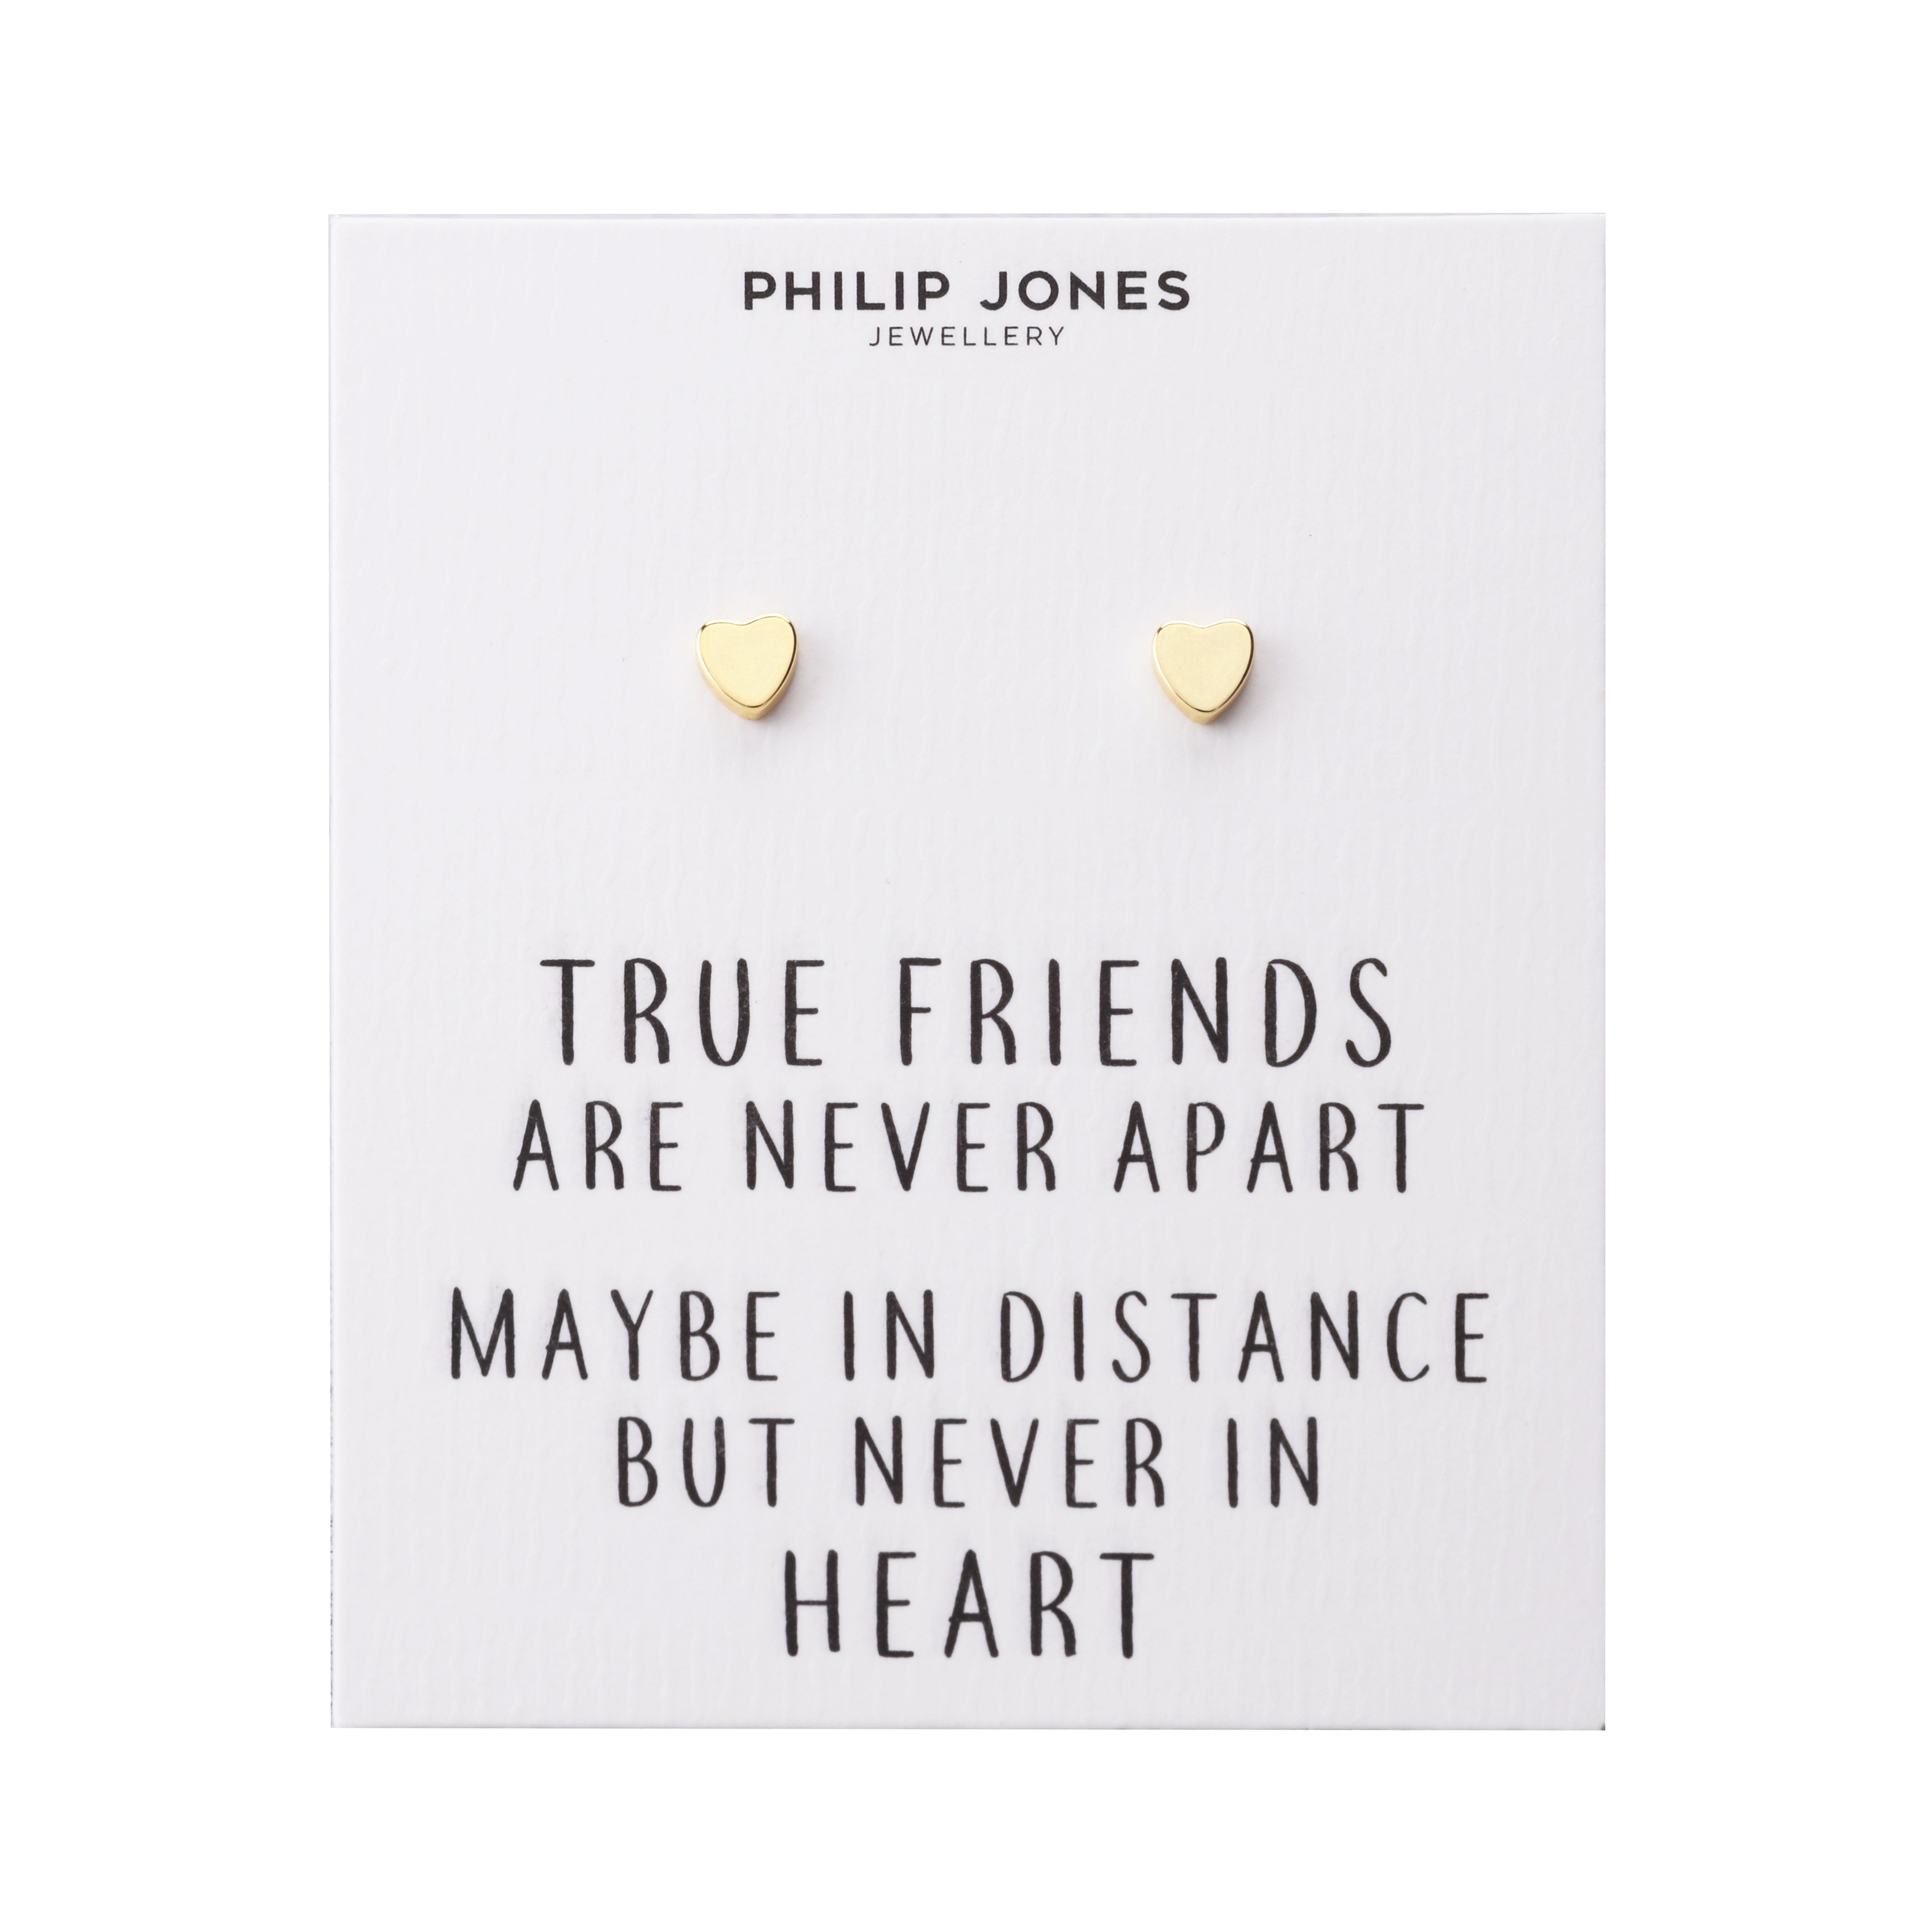 Gold Plated Heart Stud Earrings with Quote Card